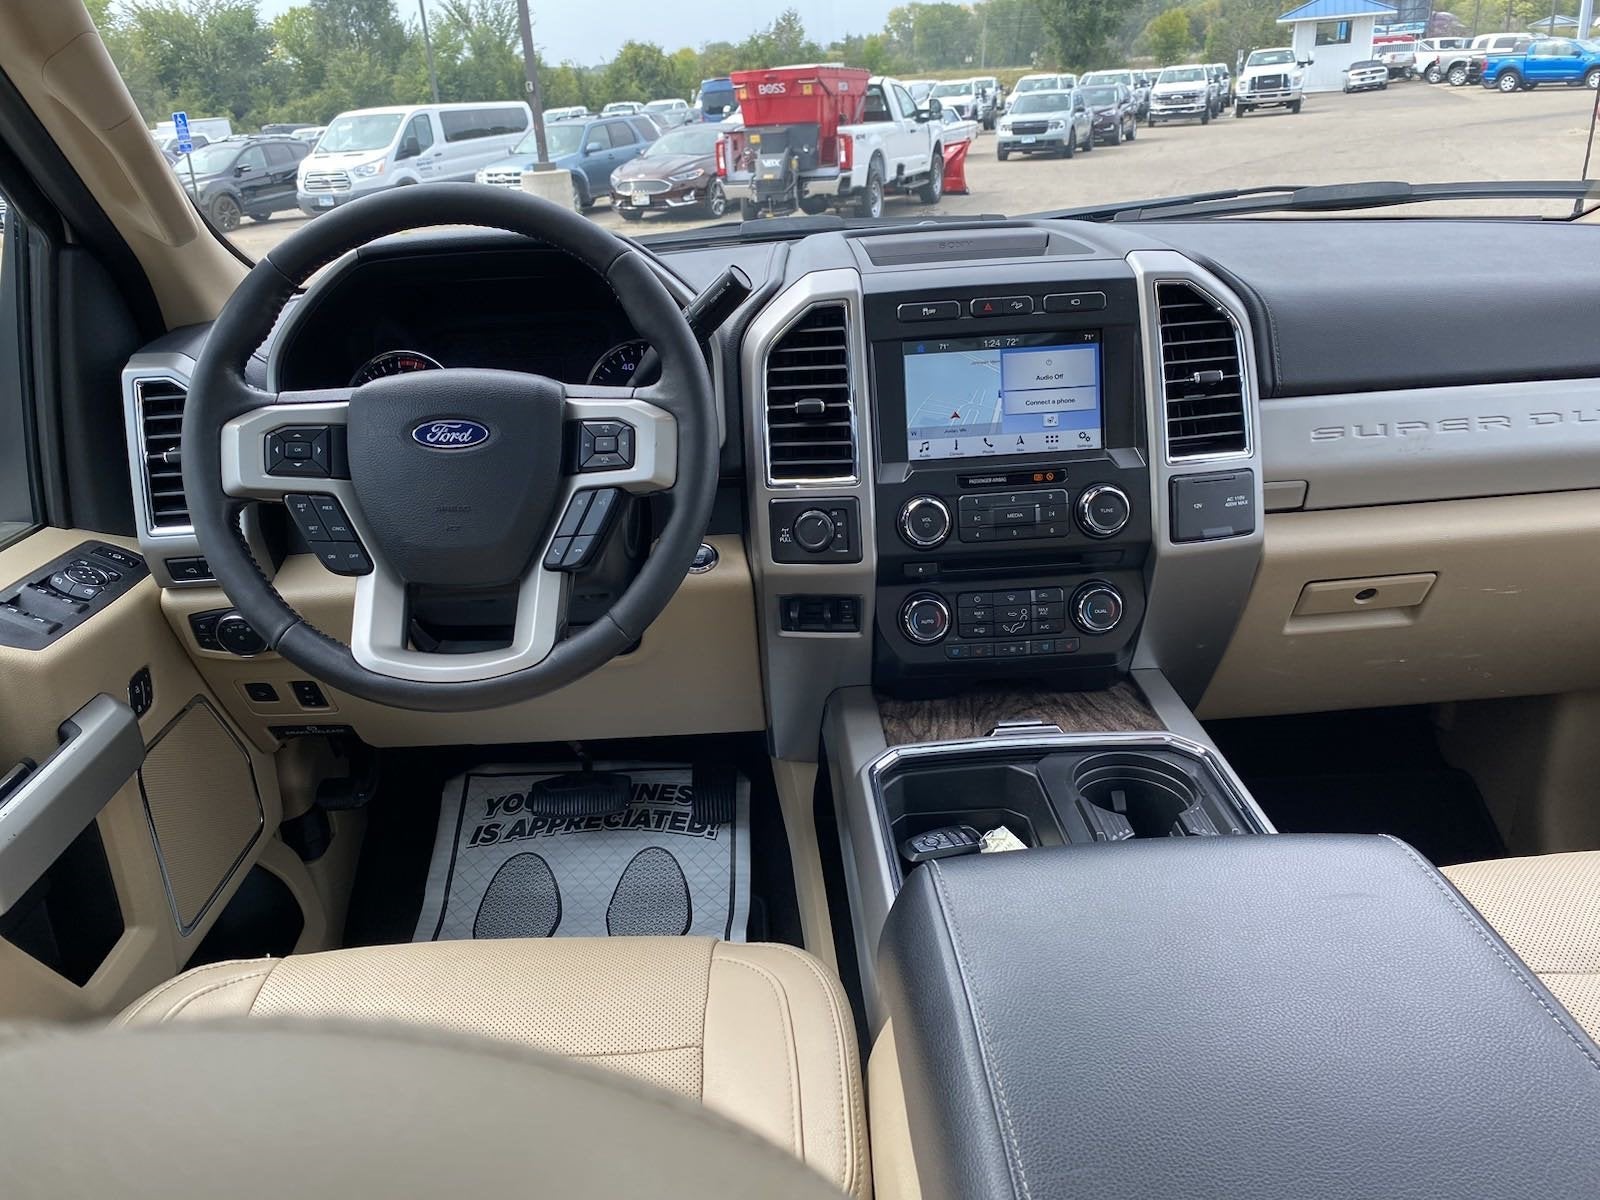 Used 2018 Ford F-250 Super Duty Lariat with VIN 1FT7W2B68JEC41223 for sale in Jordan, Minnesota